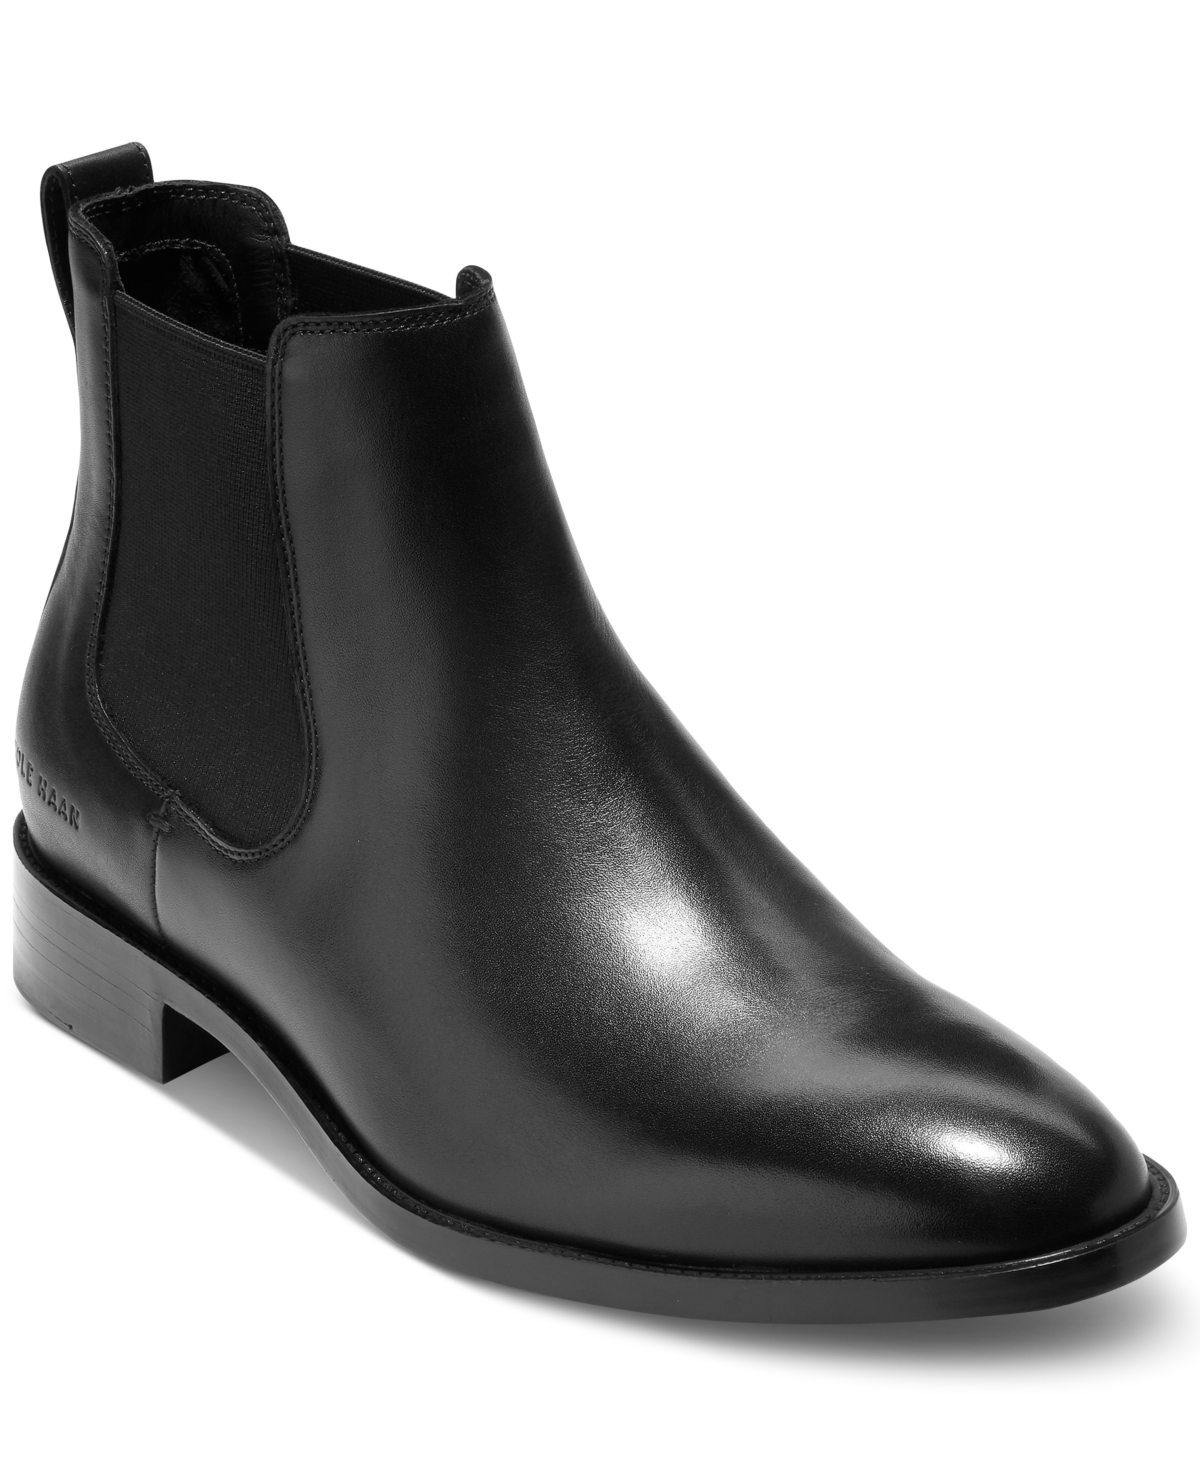 COLE HAAN MEN'S HAWTHORNE LEATHER PULL-ON CHELSEA BOOTS MEN'S SHOES